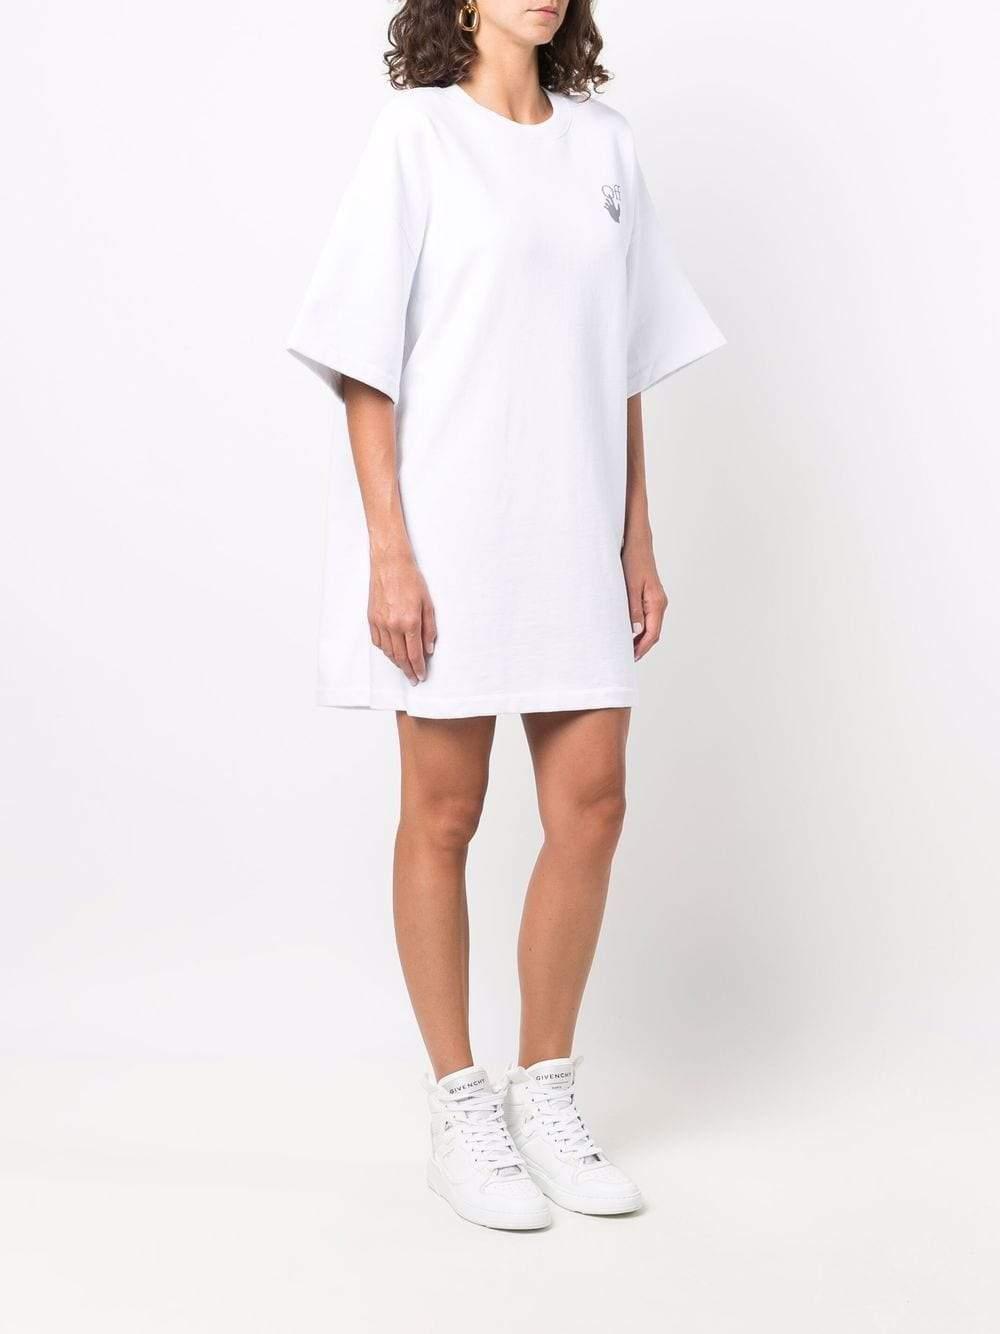 Off-White c/o Virgil Abloh Chine Arrows Snap T-shirt Dress in 